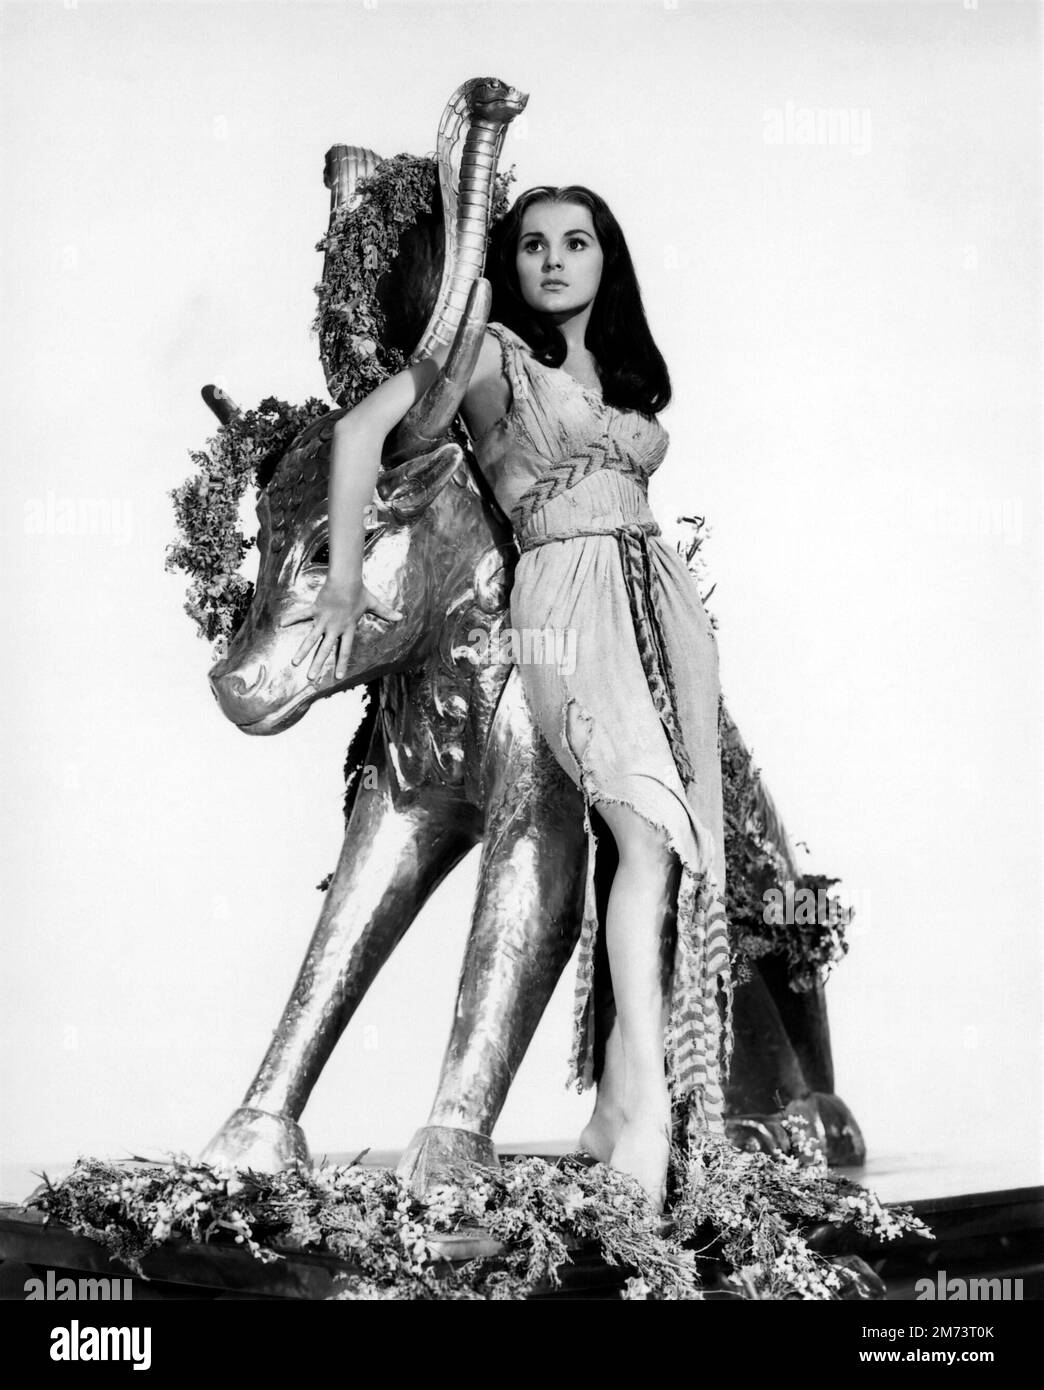 DEBRA PAGET in THE TEN COMMANDMENTS (1956), directed by CECIL B DEMILLE. Credit: PARAMOUNT PICTURES / Album Stock Photo